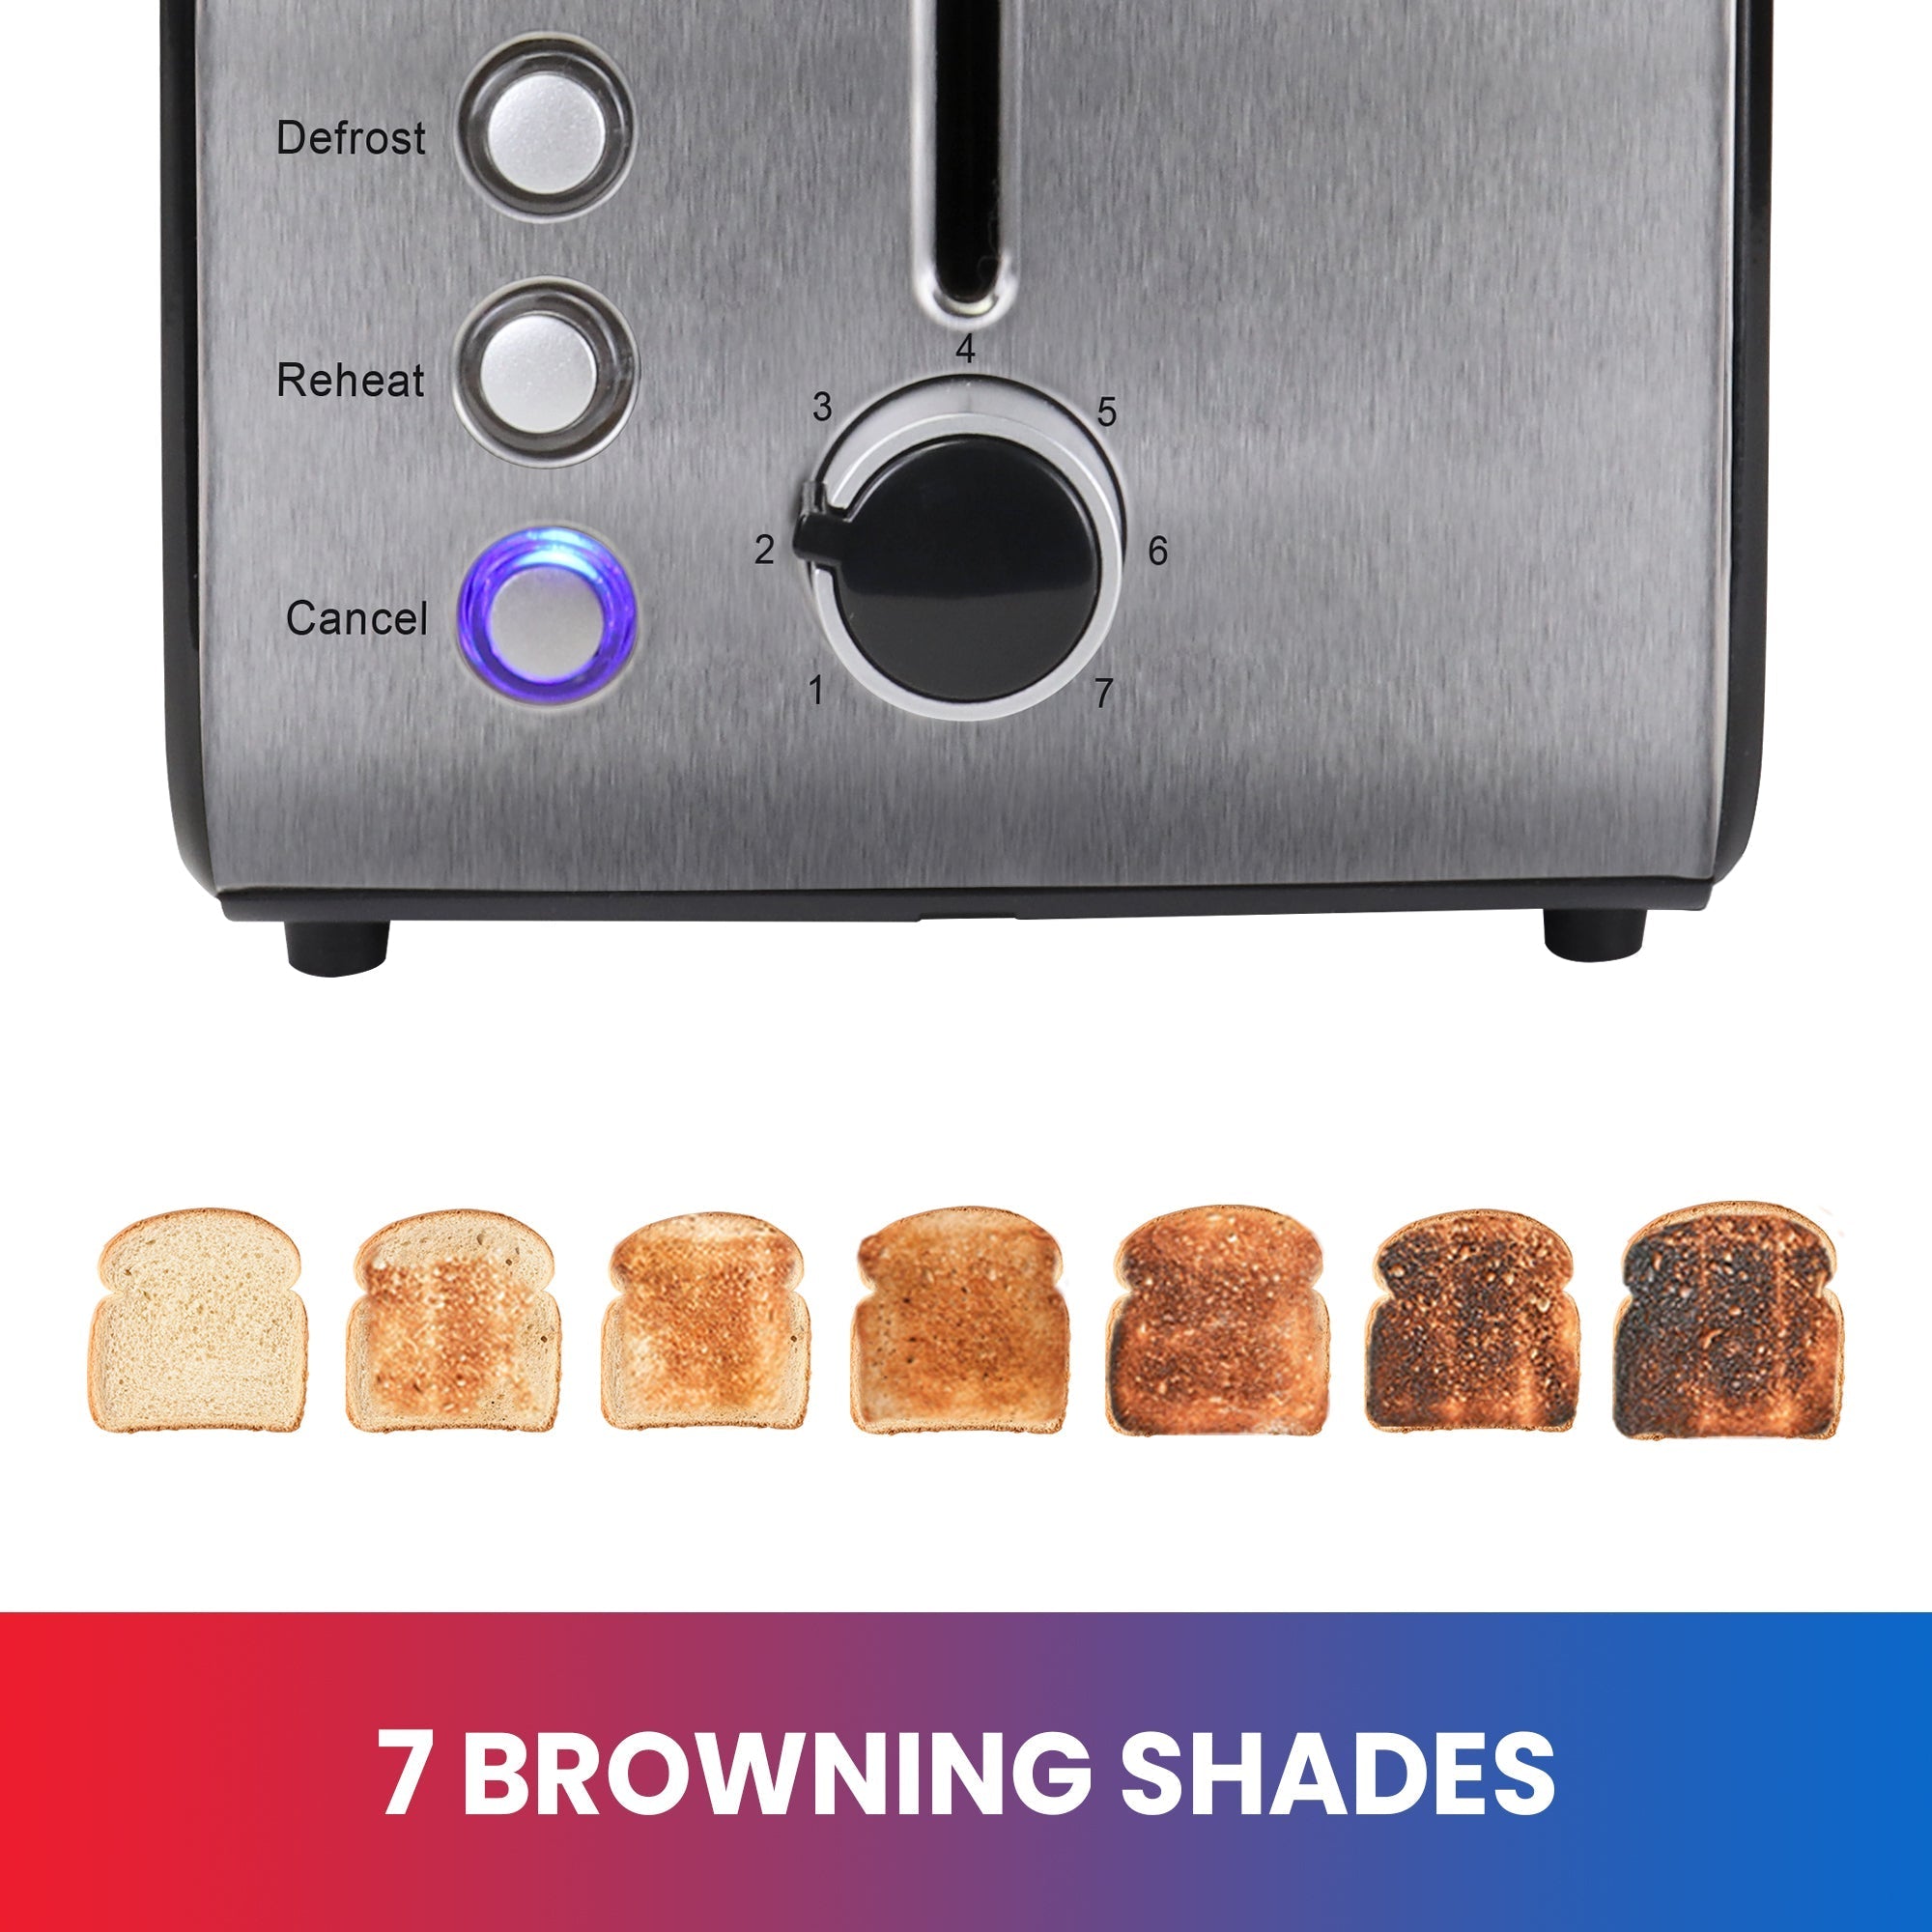 Closeup of bottom half of toaster with cancel button illuminated. Below that are 7 slices of toast at different browning levels. Text at the bottom reads, "7 Browning shades"